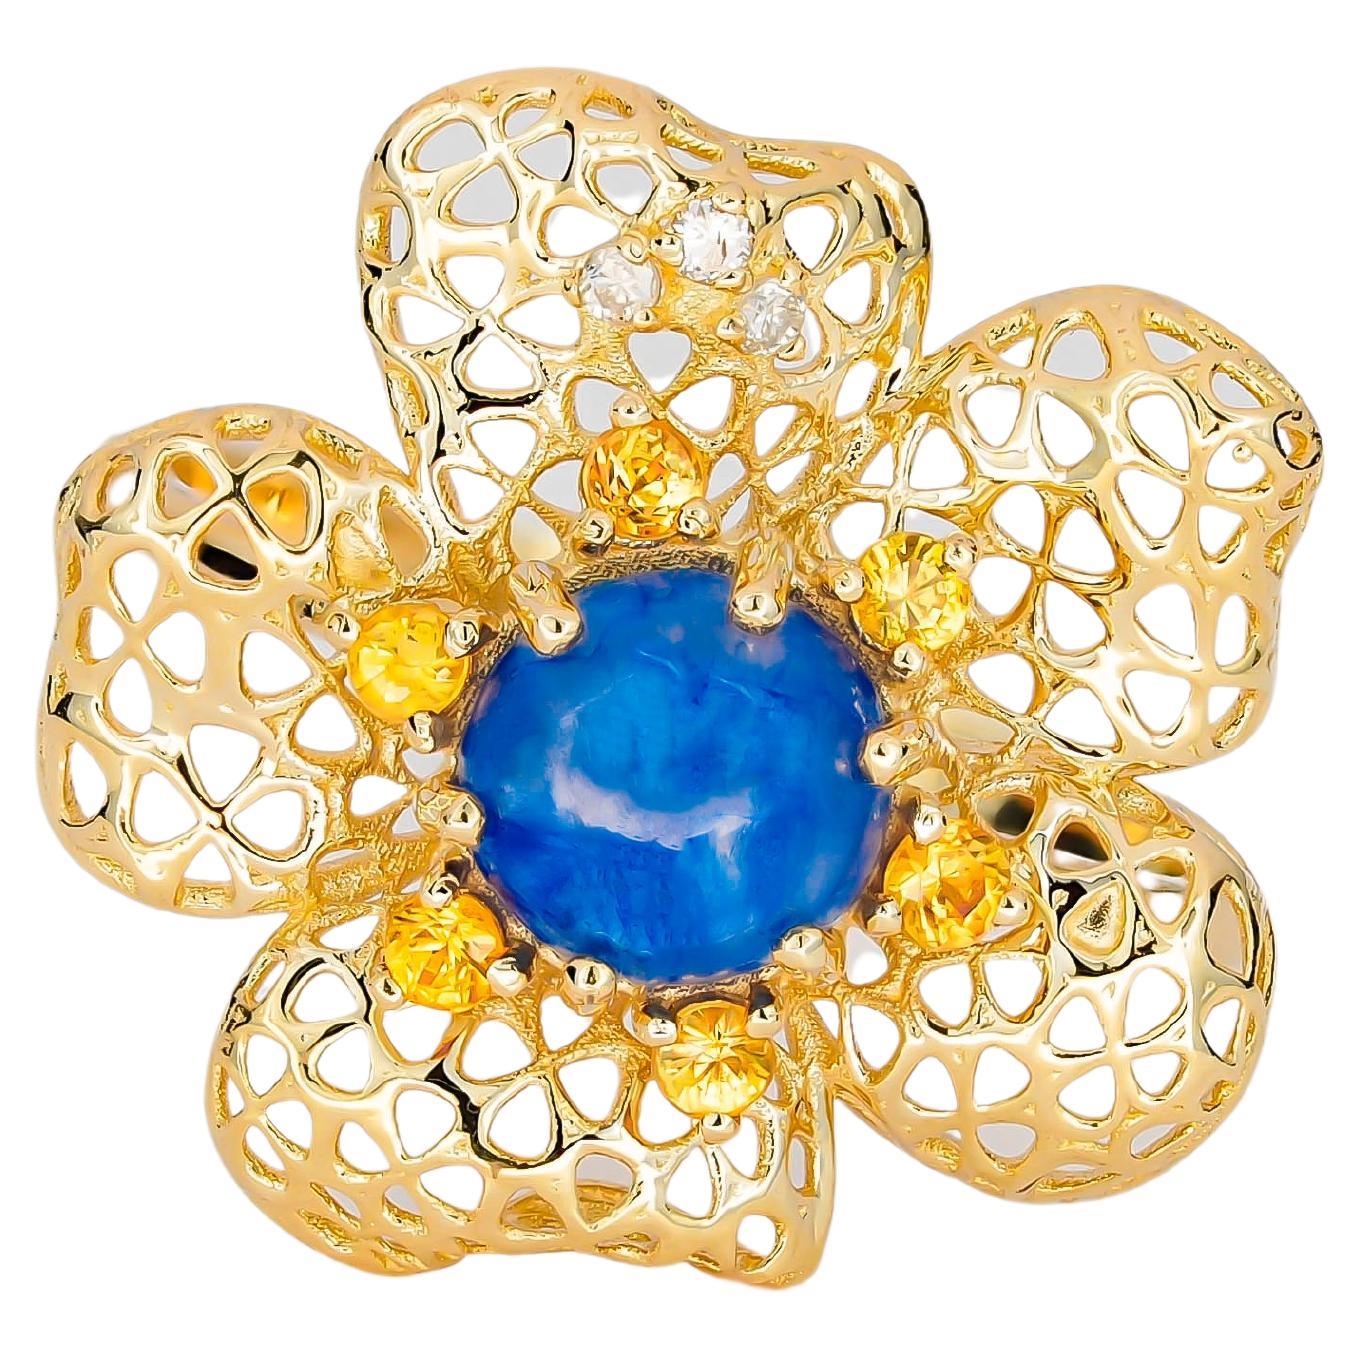 For Sale:  "Flower" Ring with Central Sapphire Cabochon, Yellow Sapphires, and Diamonds